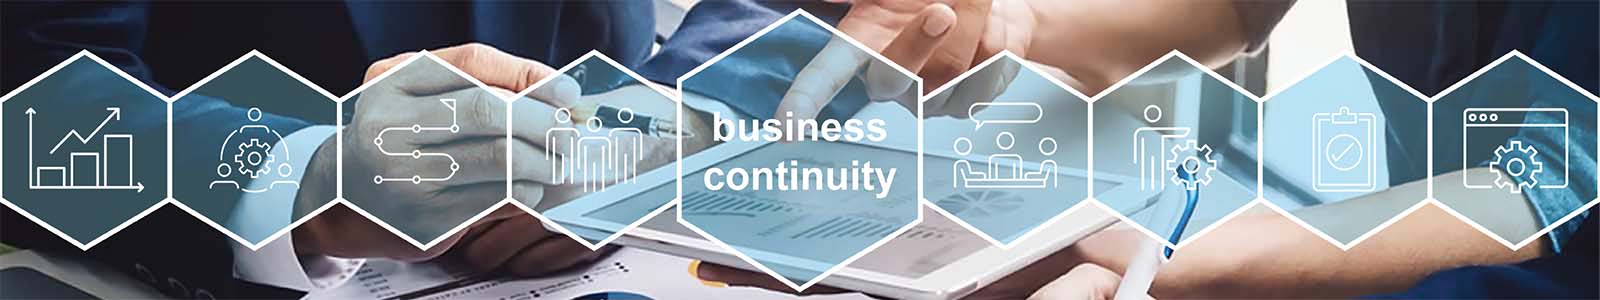 Using a document management system to facilitate business continuity